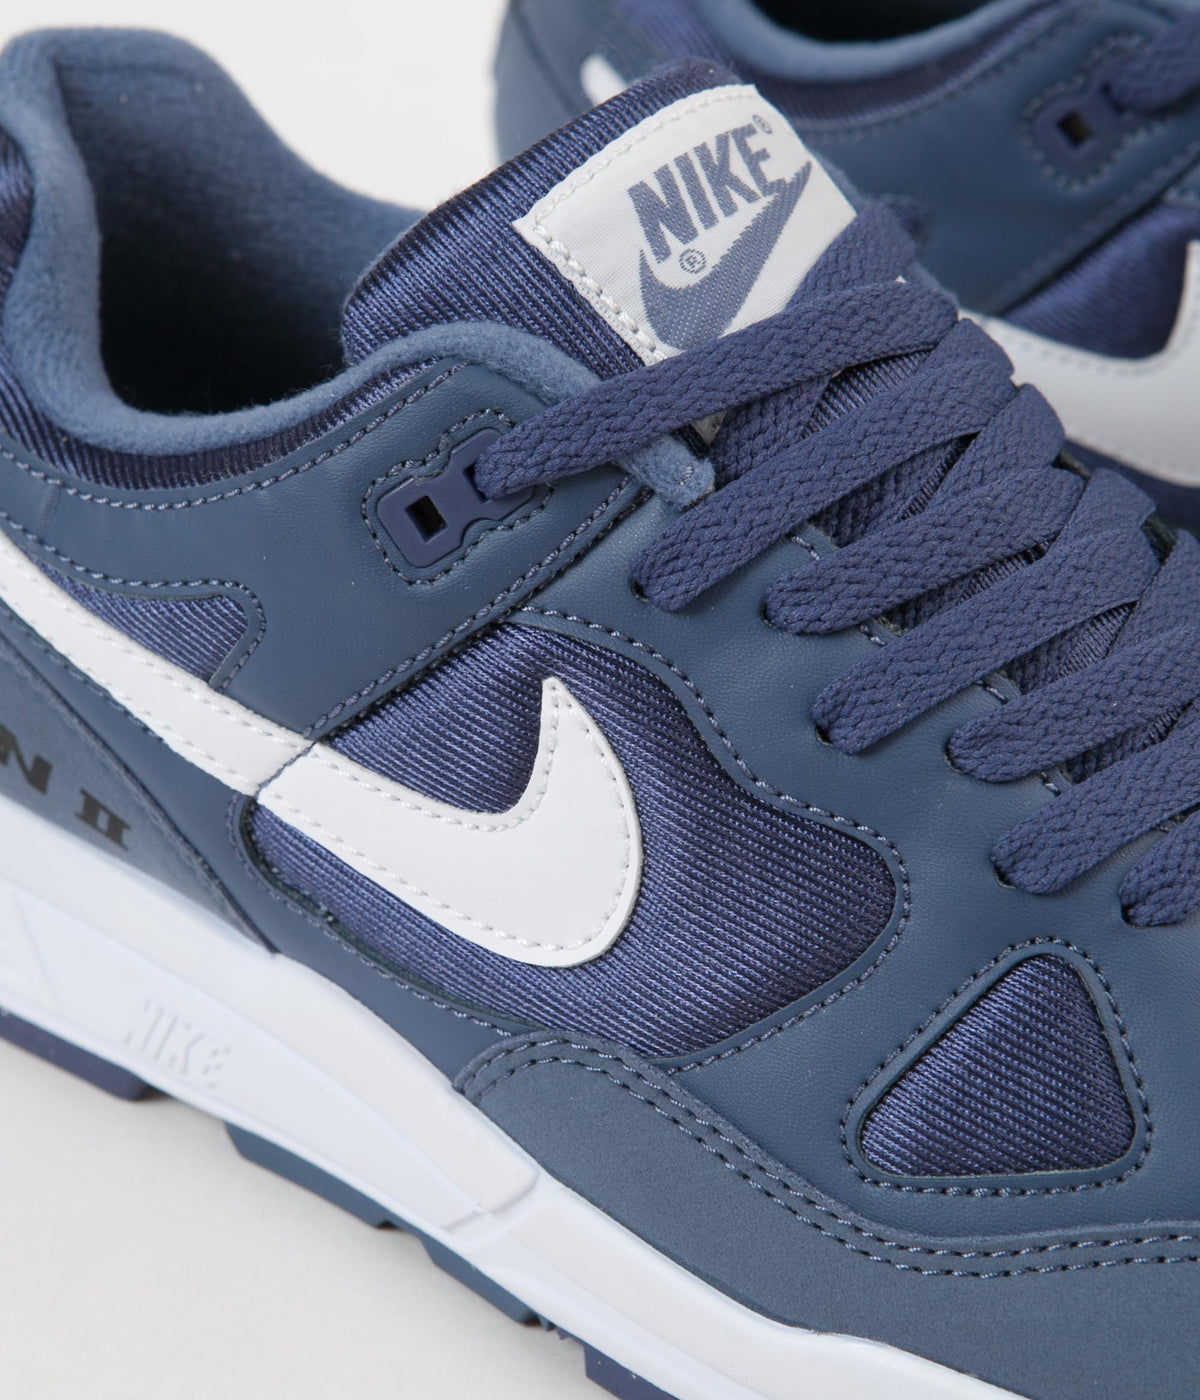 Nike Air Span II Shoes - Diffused Blue / White - Blue - Black | Always in Colour